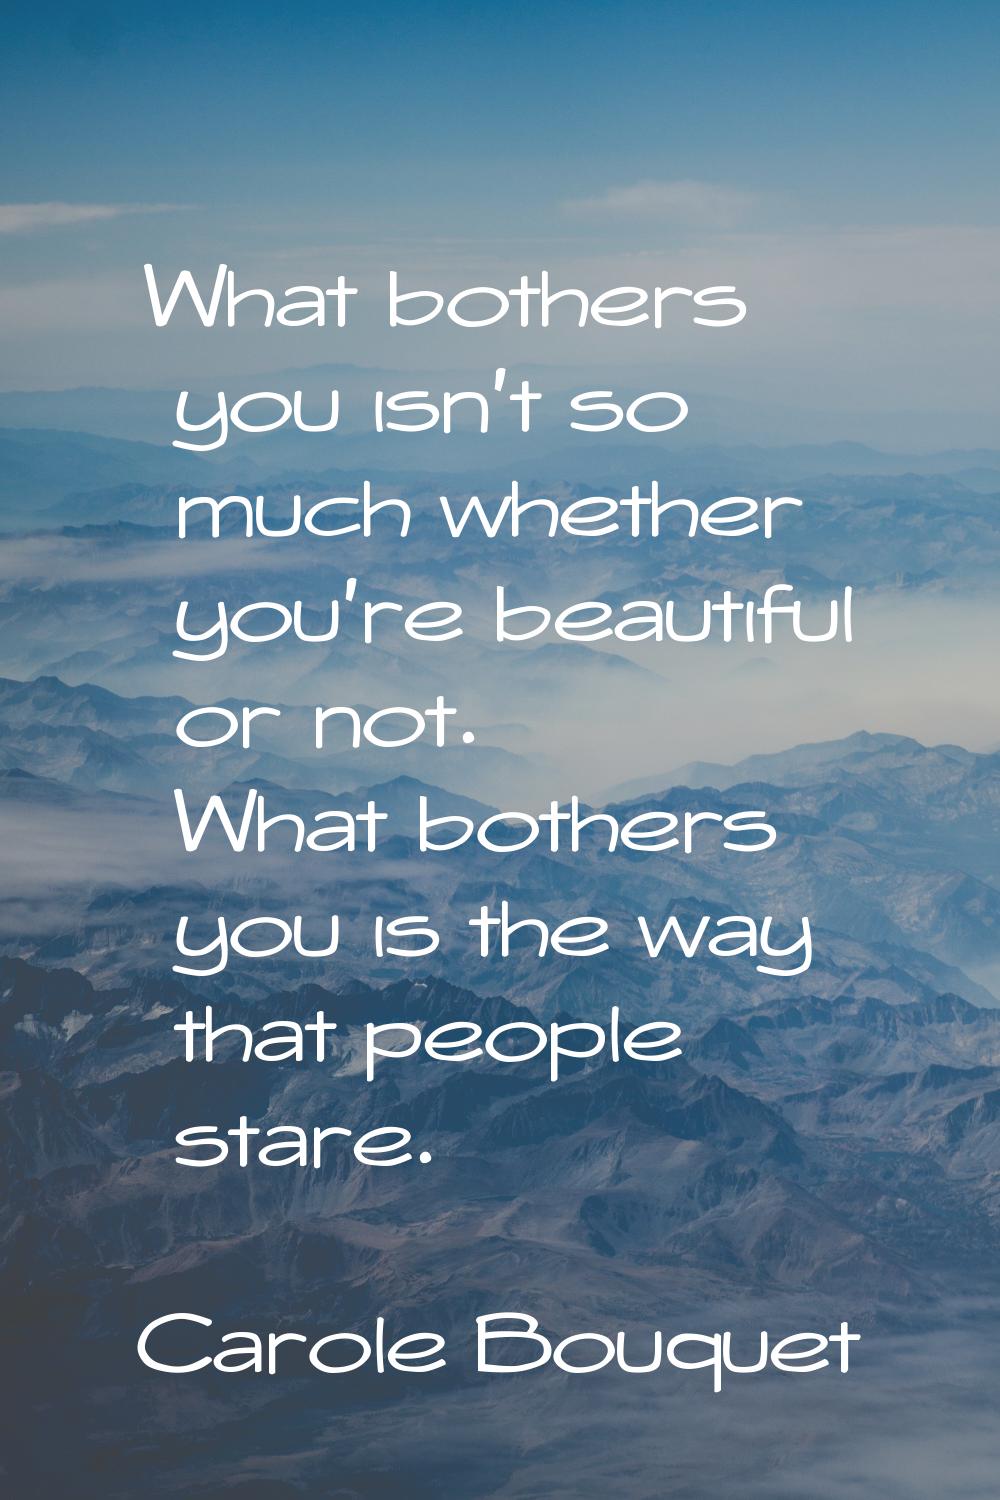 What bothers you isn't so much whether you're beautiful or not. What bothers you is the way that pe